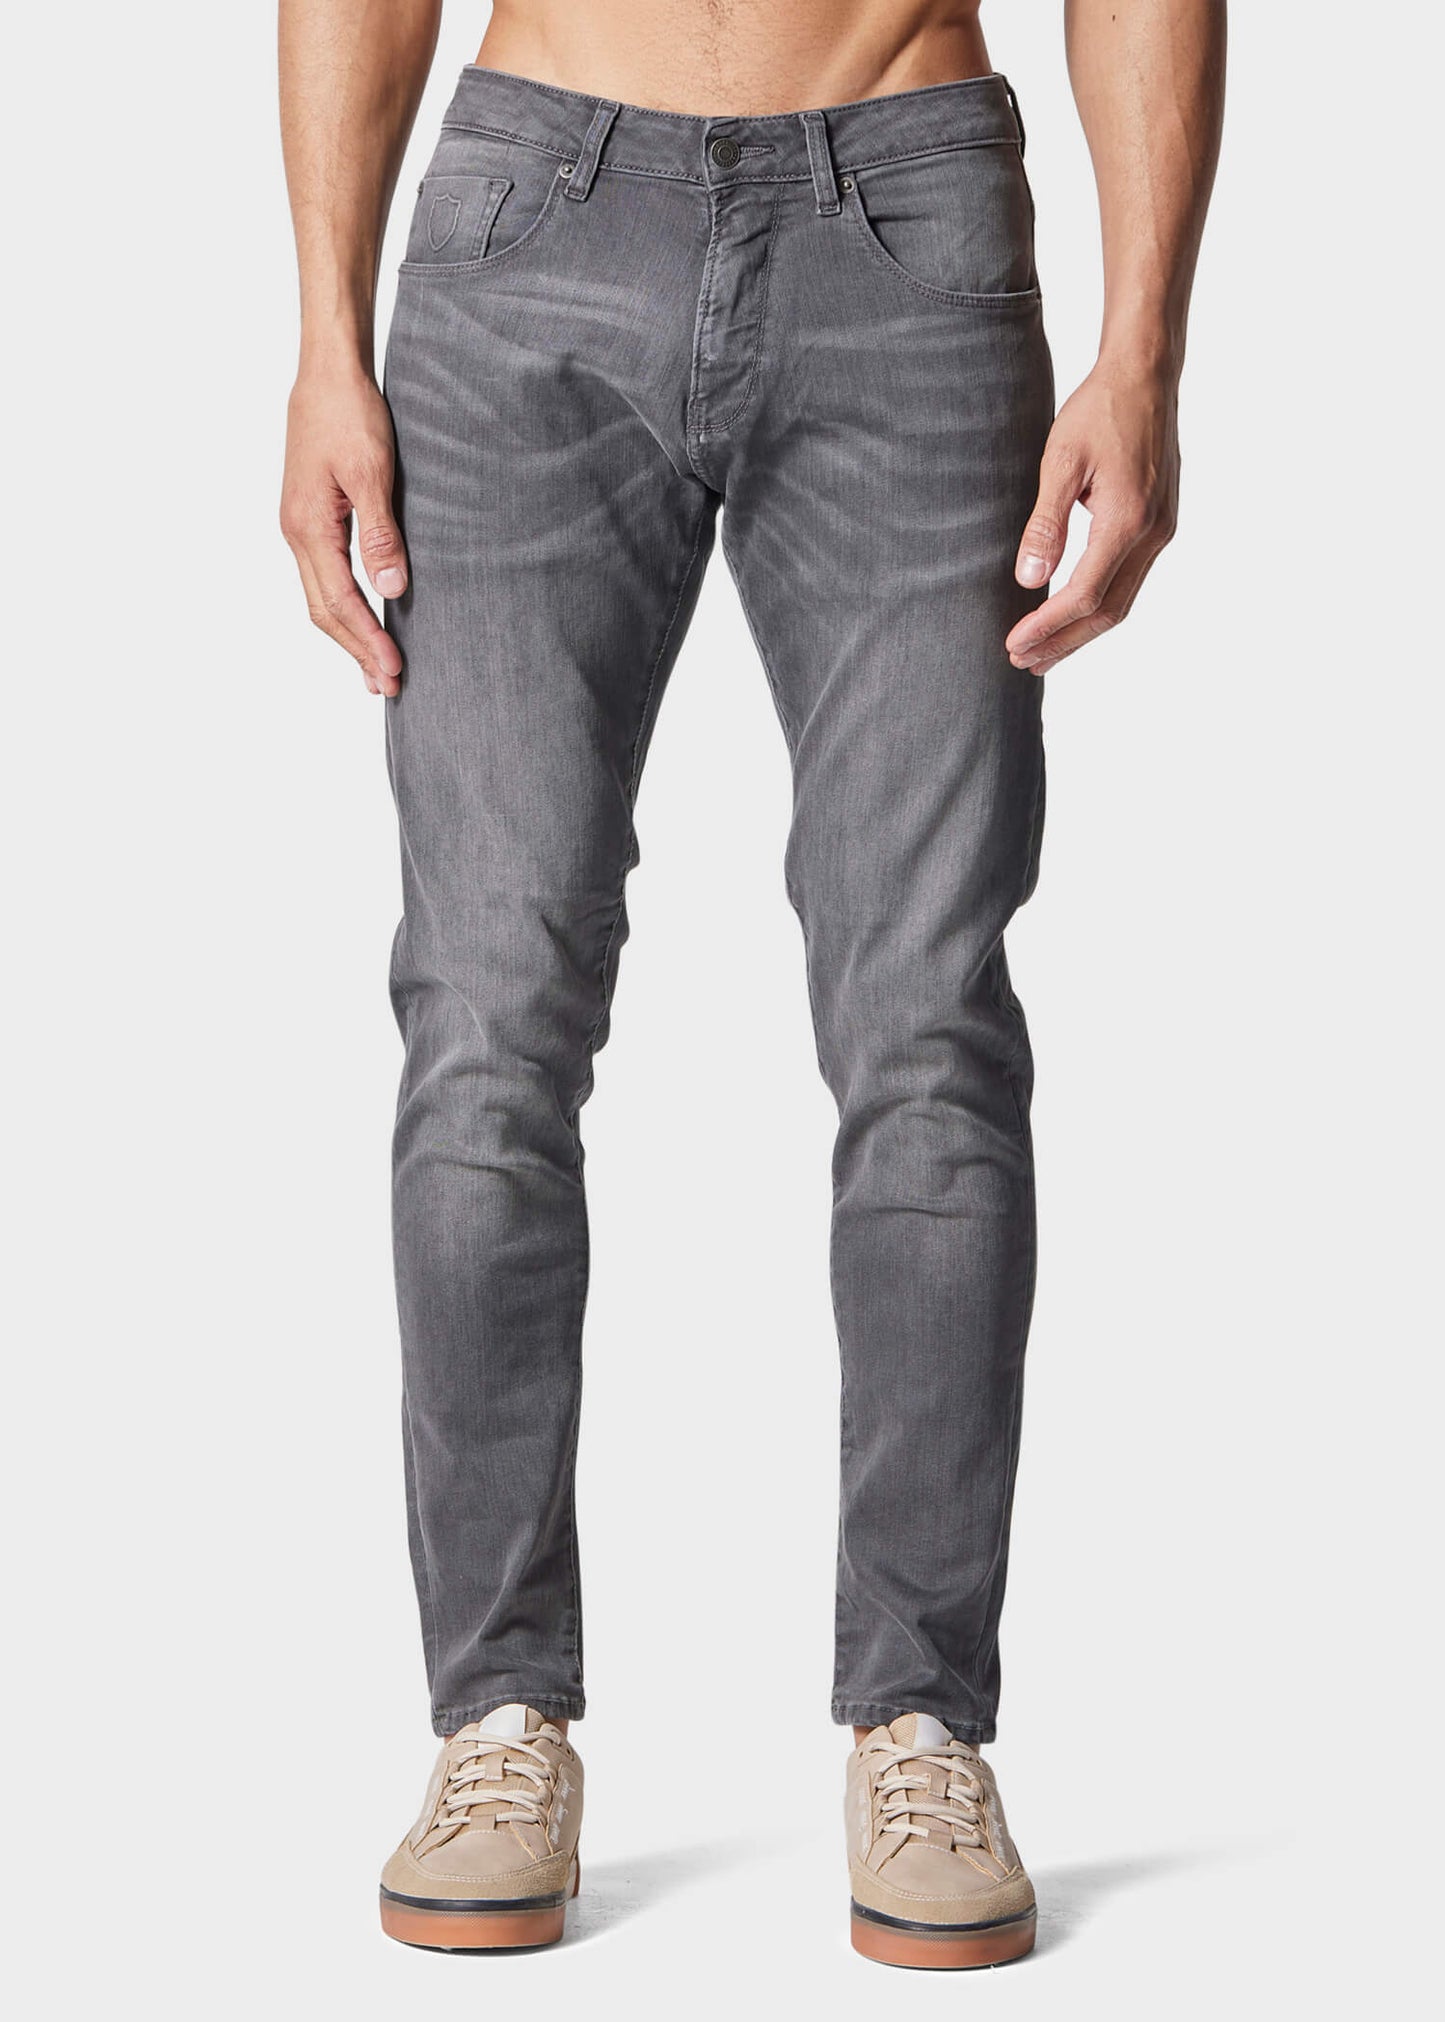 Moriarty LAK 917 Slim Fit Jeans